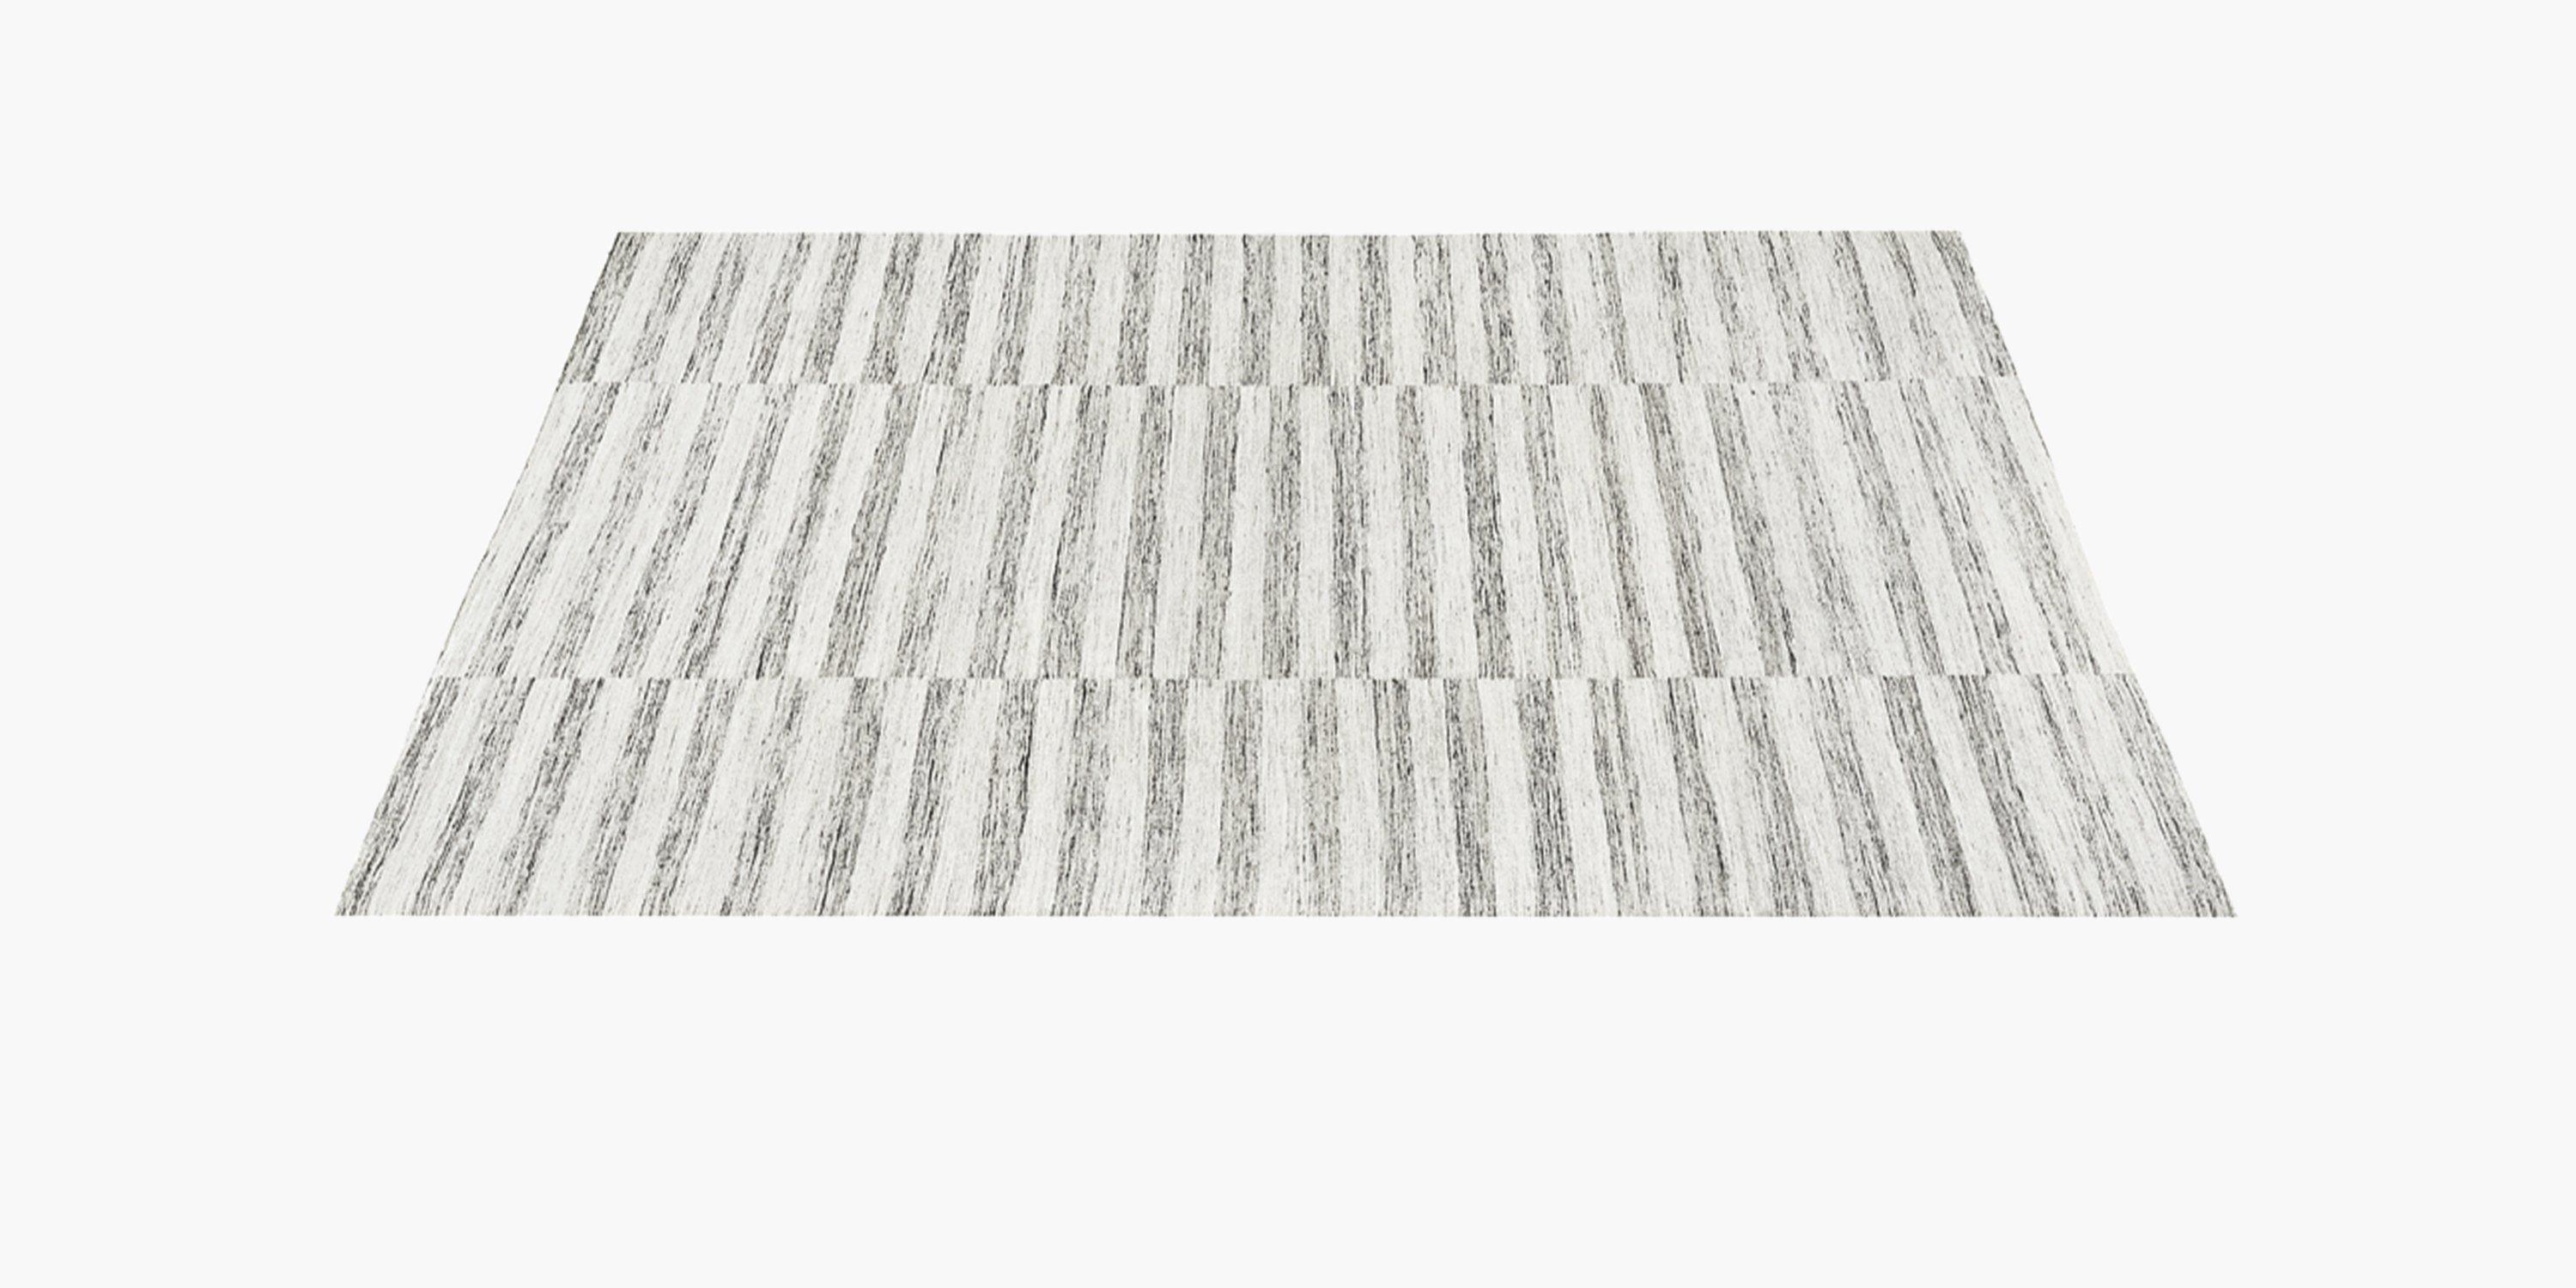 Expertly hand-woven by master artisans from soft, luscious wool, the Alterno is artfully distressed to adopt the look of a treasured heirloom. The beautifully textured yarn adds depth and dimension, along with a luxurious feeling underfoot. The Ben